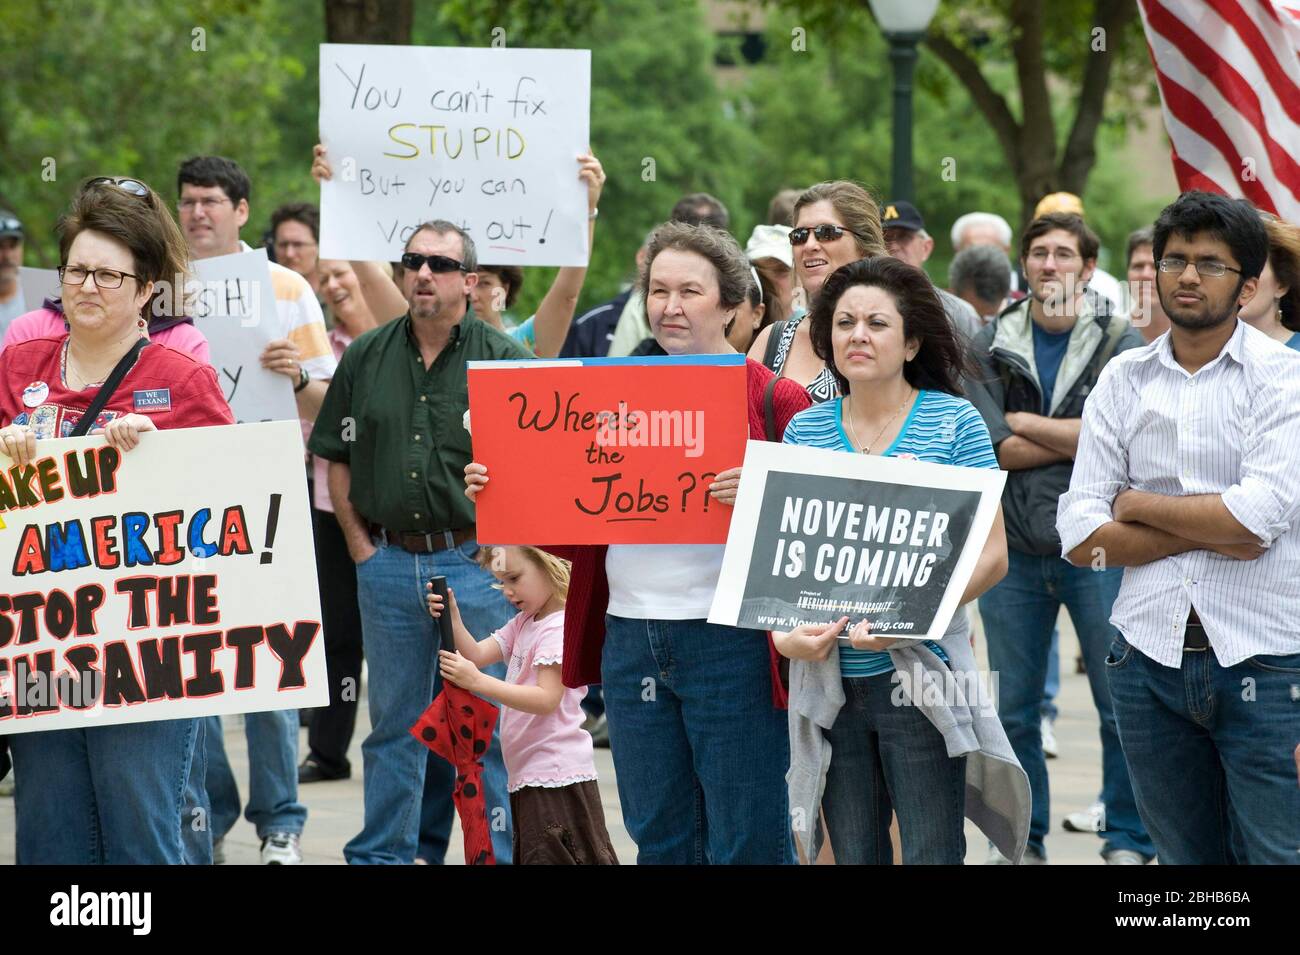 Austin, Texas USA, April 15th 2010: Tea Party supporters protest government spending outside the Texas Capitol during an annual tax day rally against what they see as unreasonably high federal taxation. ©Marjorie Kamys Cotera/Daemmrich Photography Stock Photo